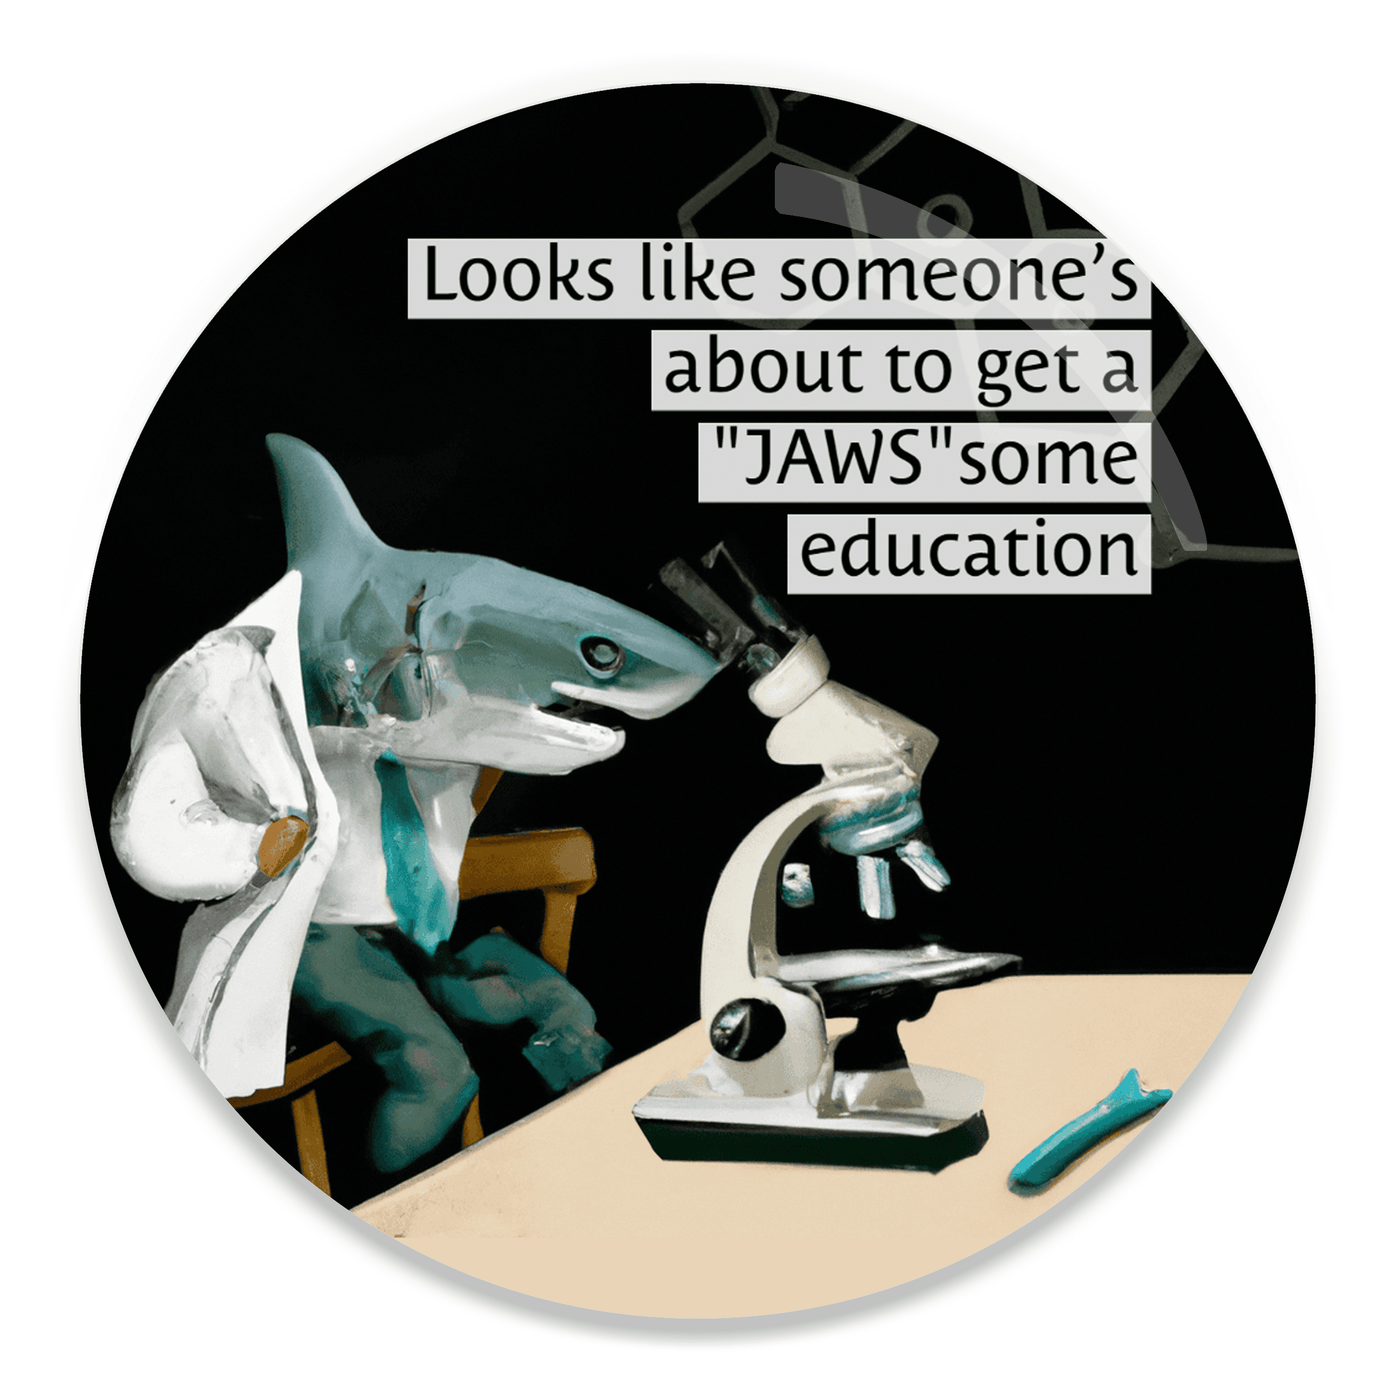 2.25 inch round colorful magnet with image of a shark in a lab coat